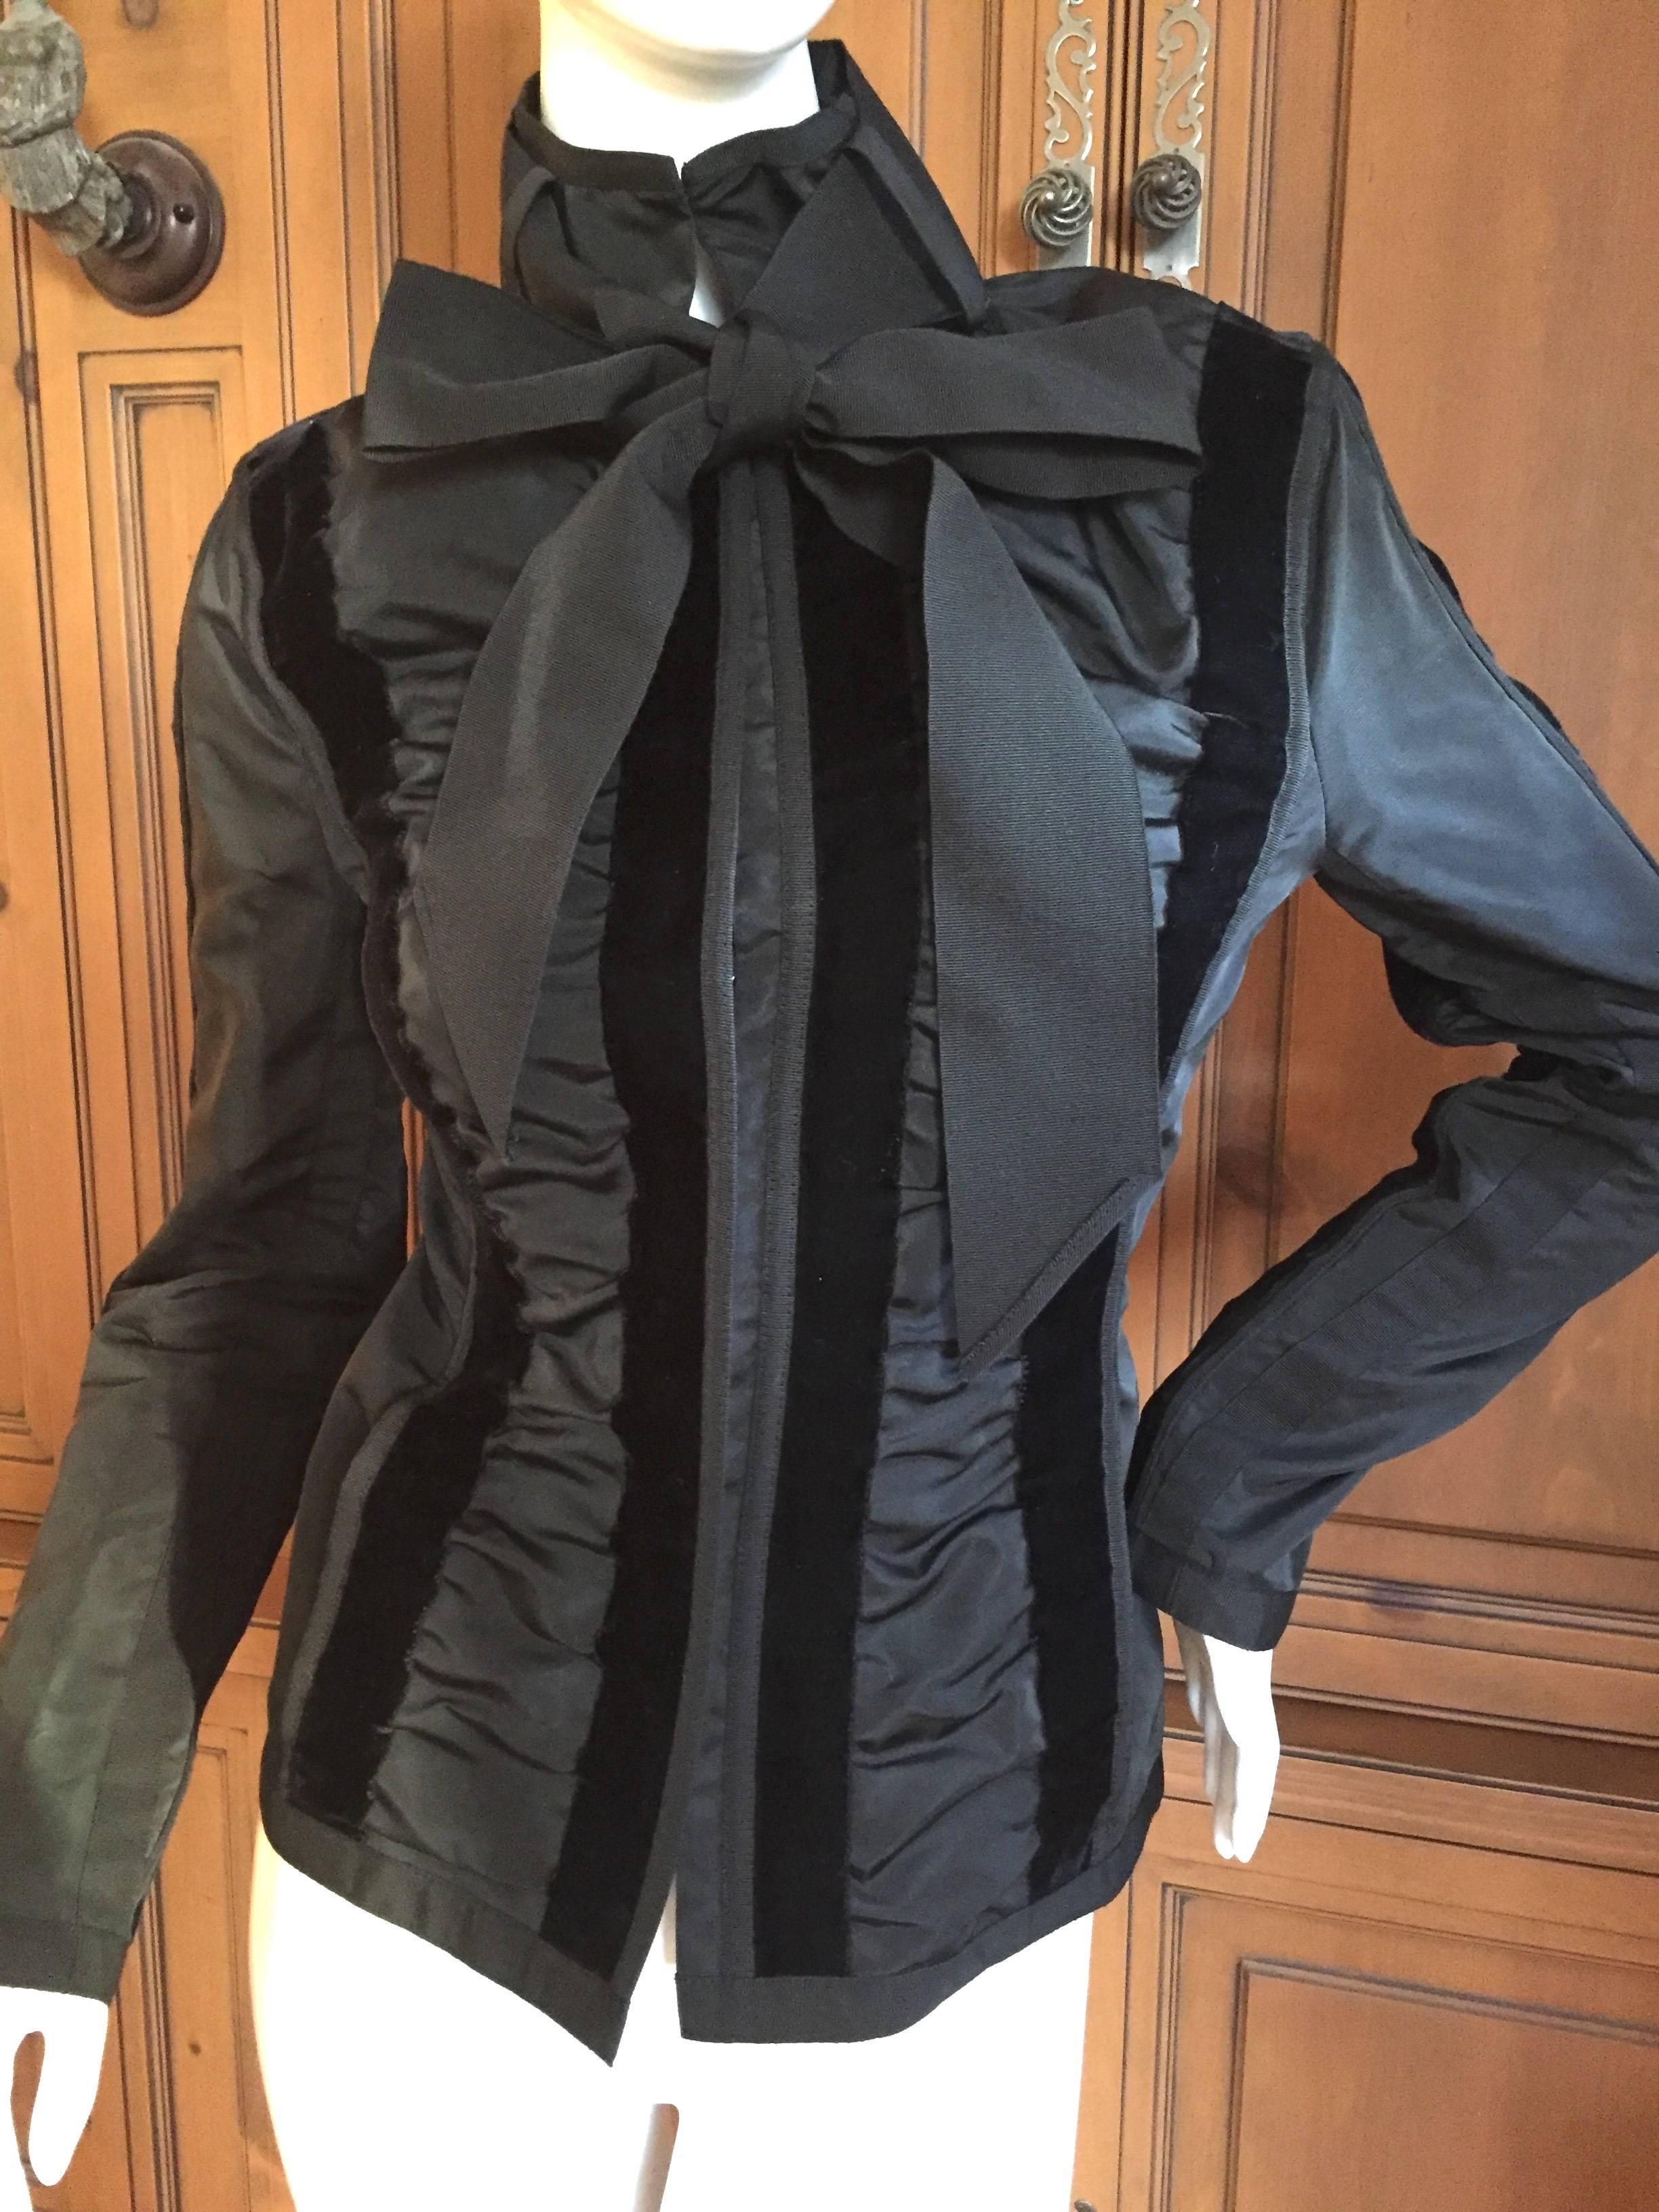 Tom Ford for YSL Black Jacket. Look one from 2002 Fall Yves Saint Laurent. Ruched panels alternating with velvet bands.
Size 34
Bust 34"
Waist 28"
Length 24"
Excellent condition